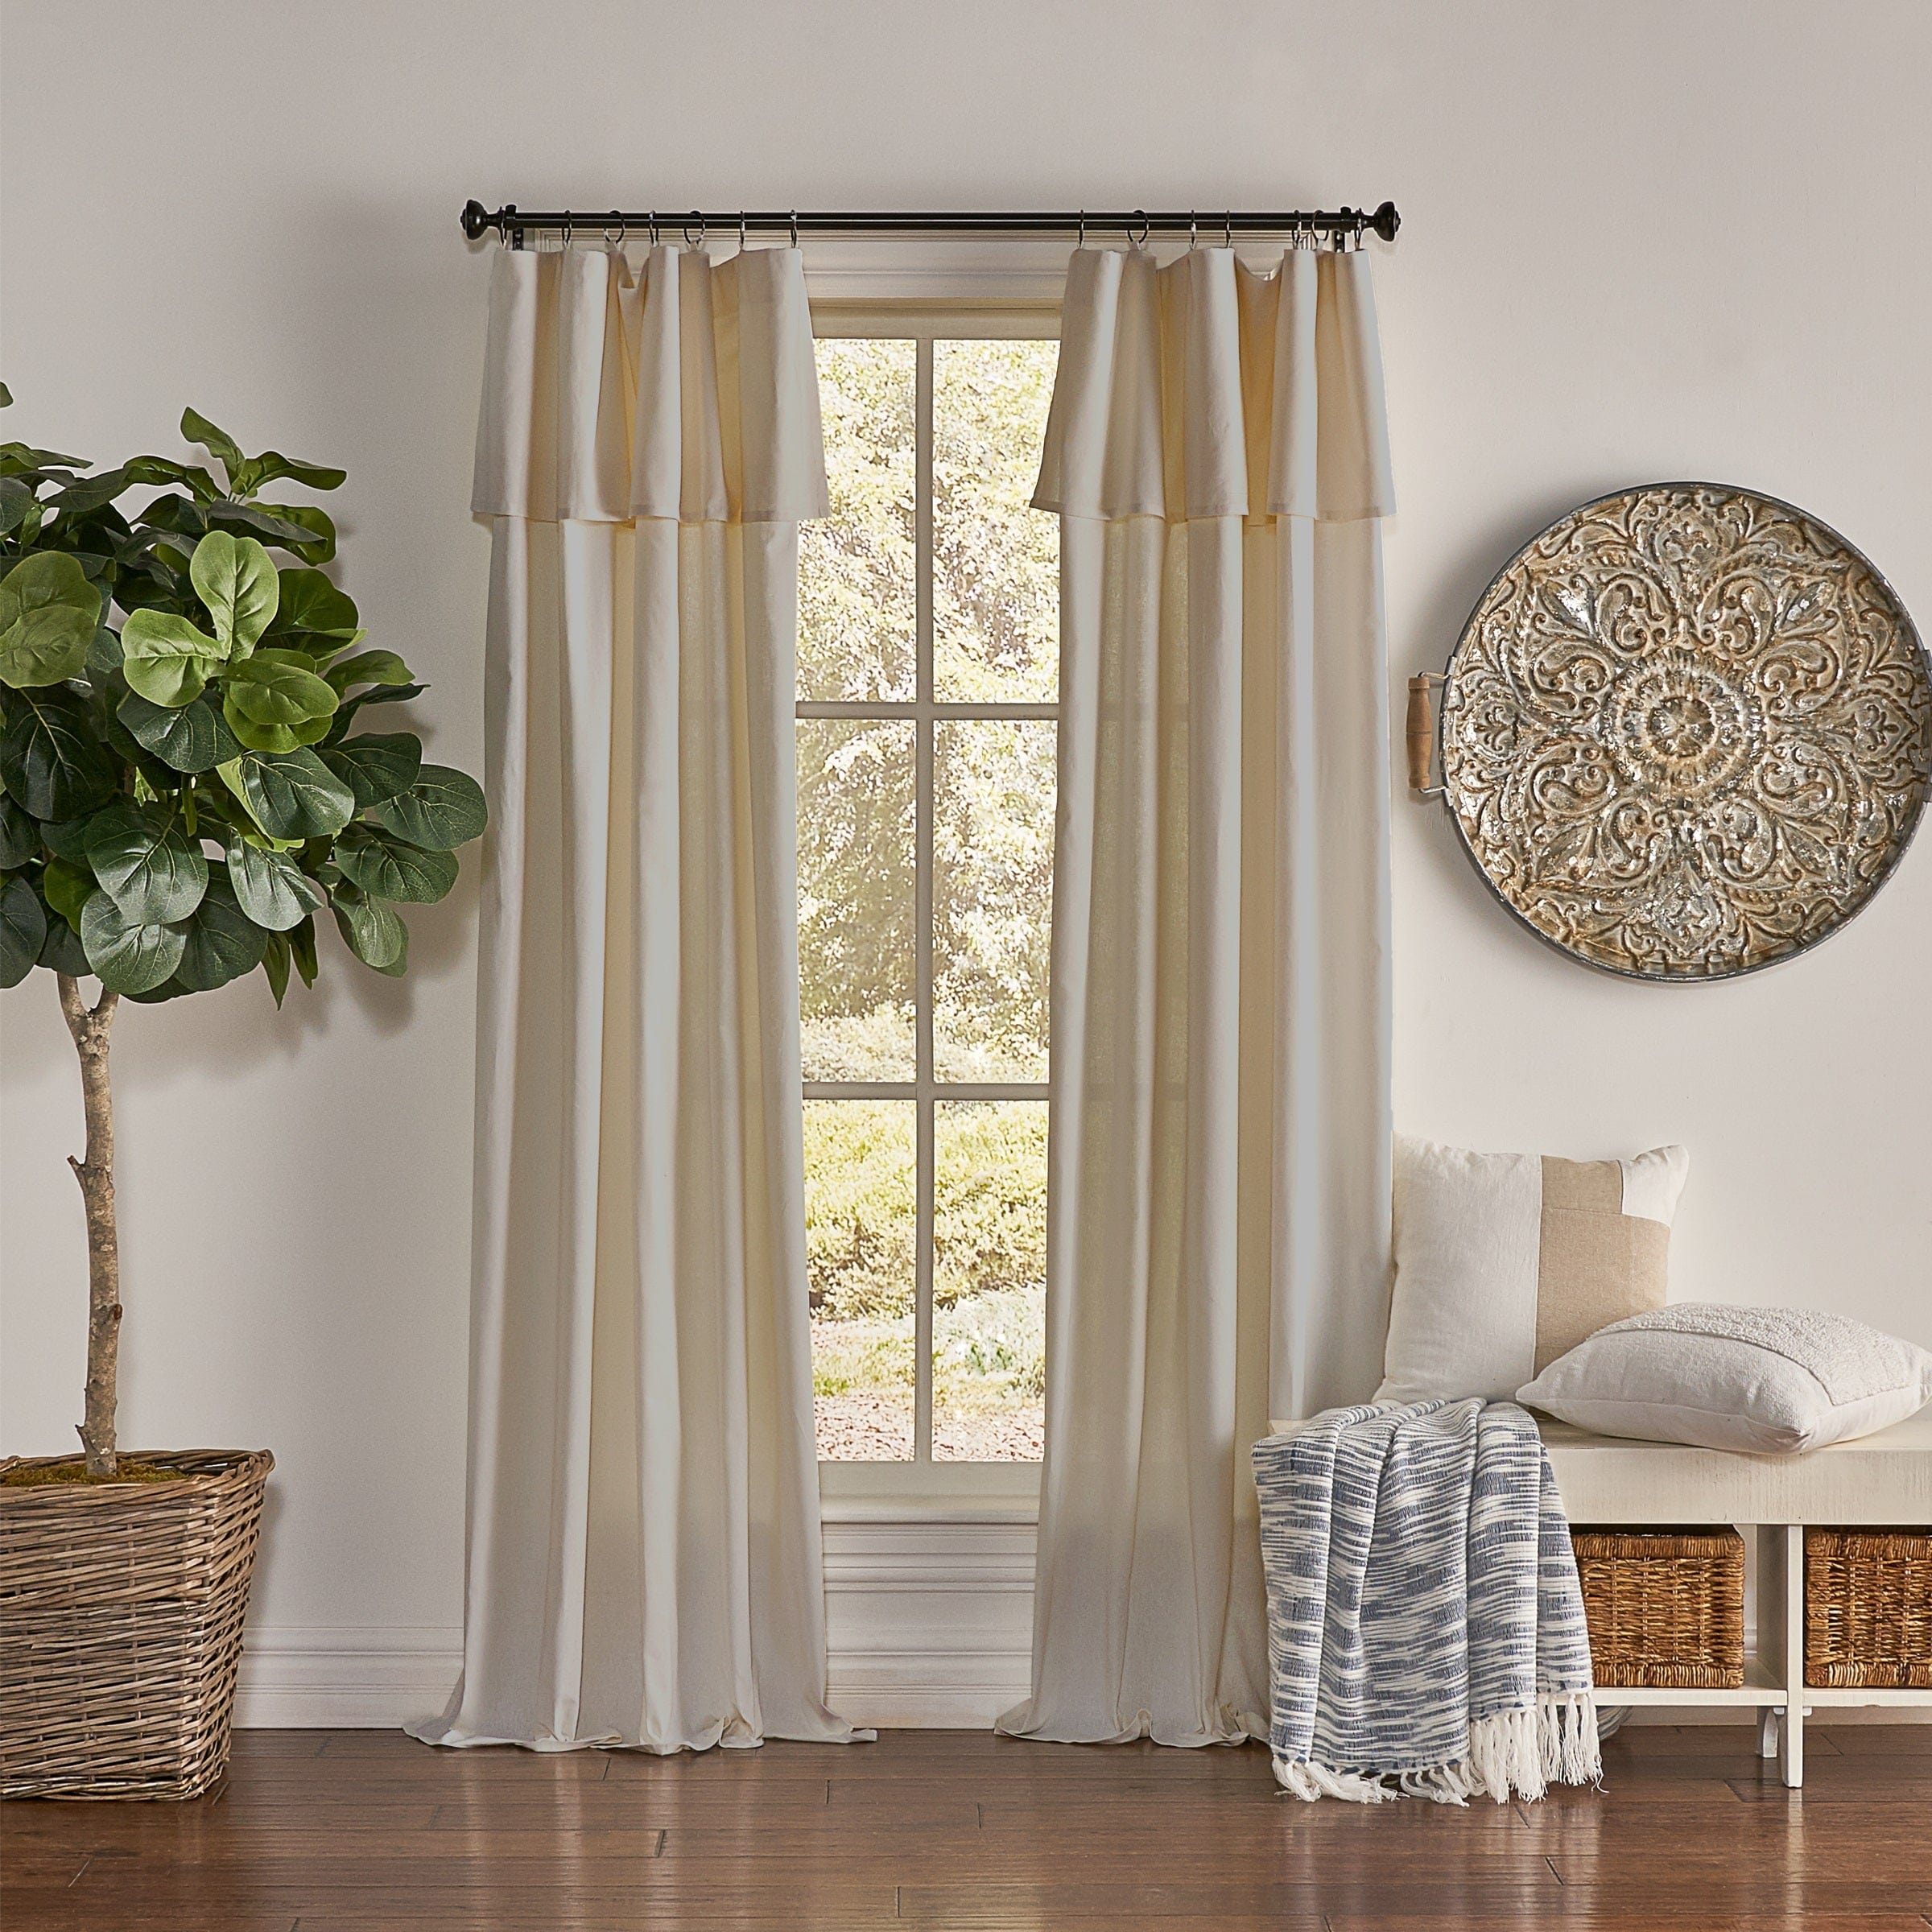 Photos - Curtains & Drapes SureFit Mercantile Drop Cloth Solid Curtain Panel with Valance in Linen 50